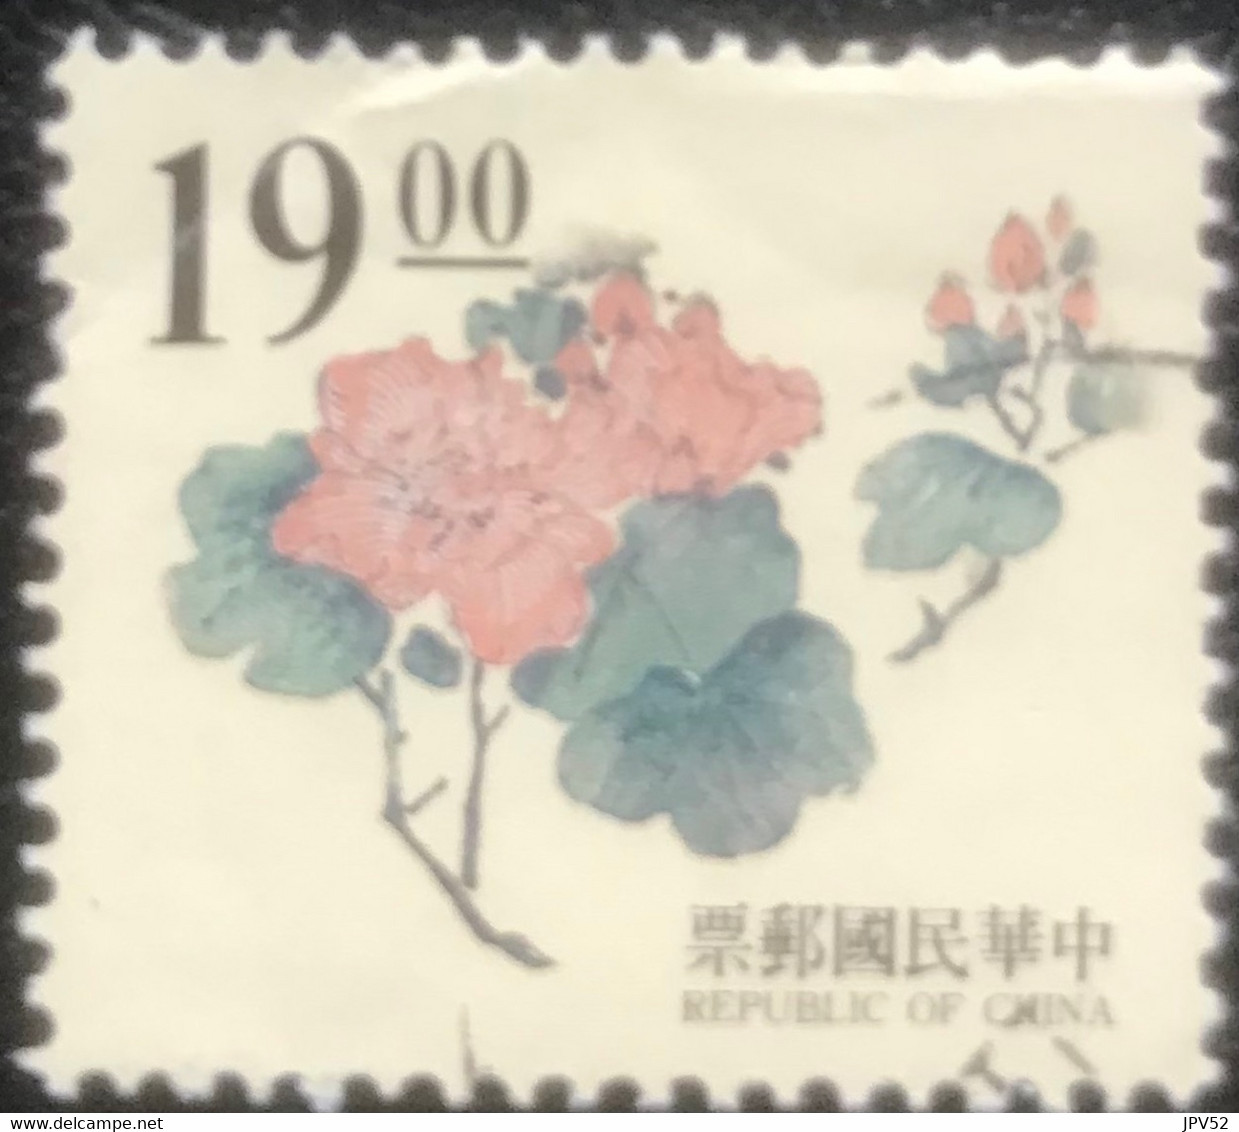 Republic Of China - Taiwan - C6/11 - (°)used - 1995 - Michel 2219 - Oude Chinese Gravures - Gebruikt